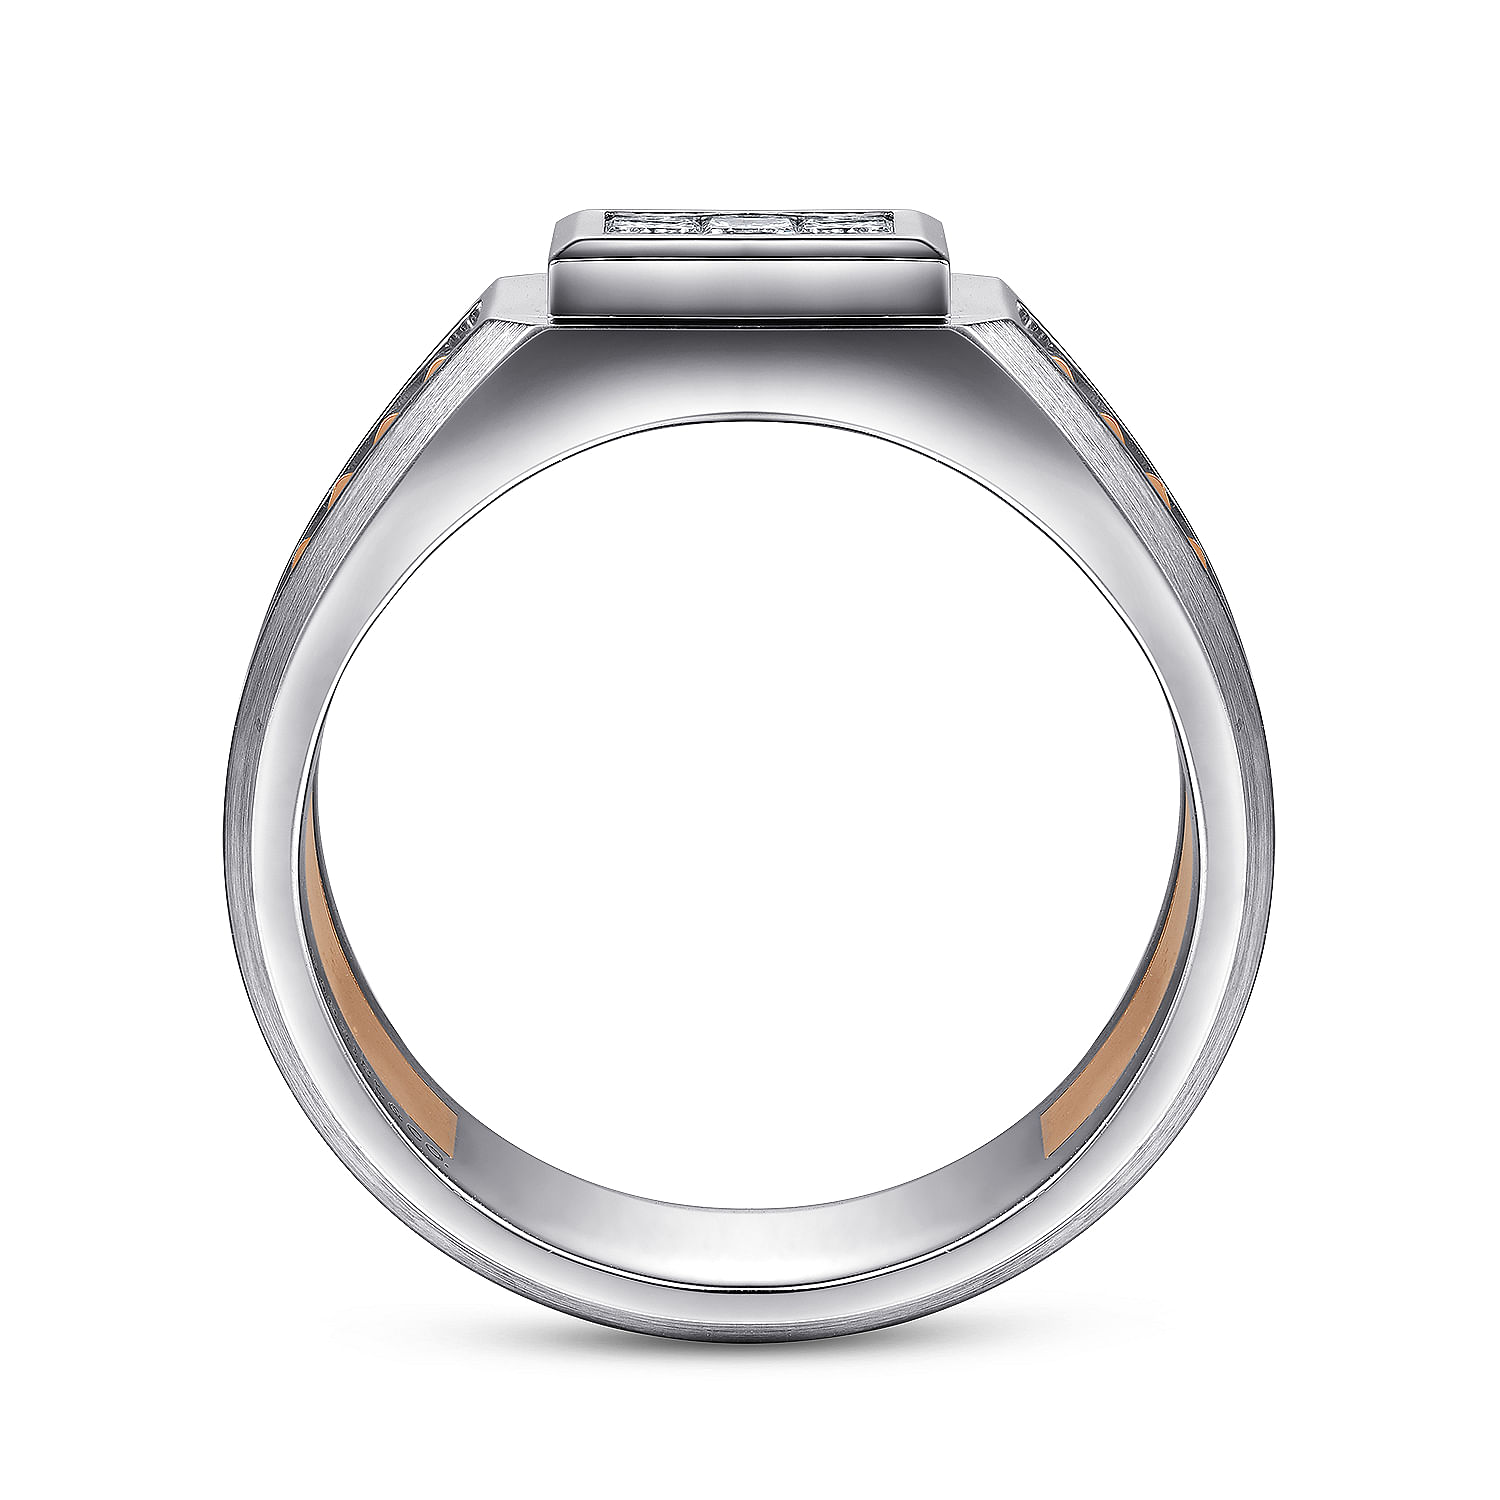 Wide 14K White-Rose Gold Ring with Pavé Diamonds in High Polished Finish